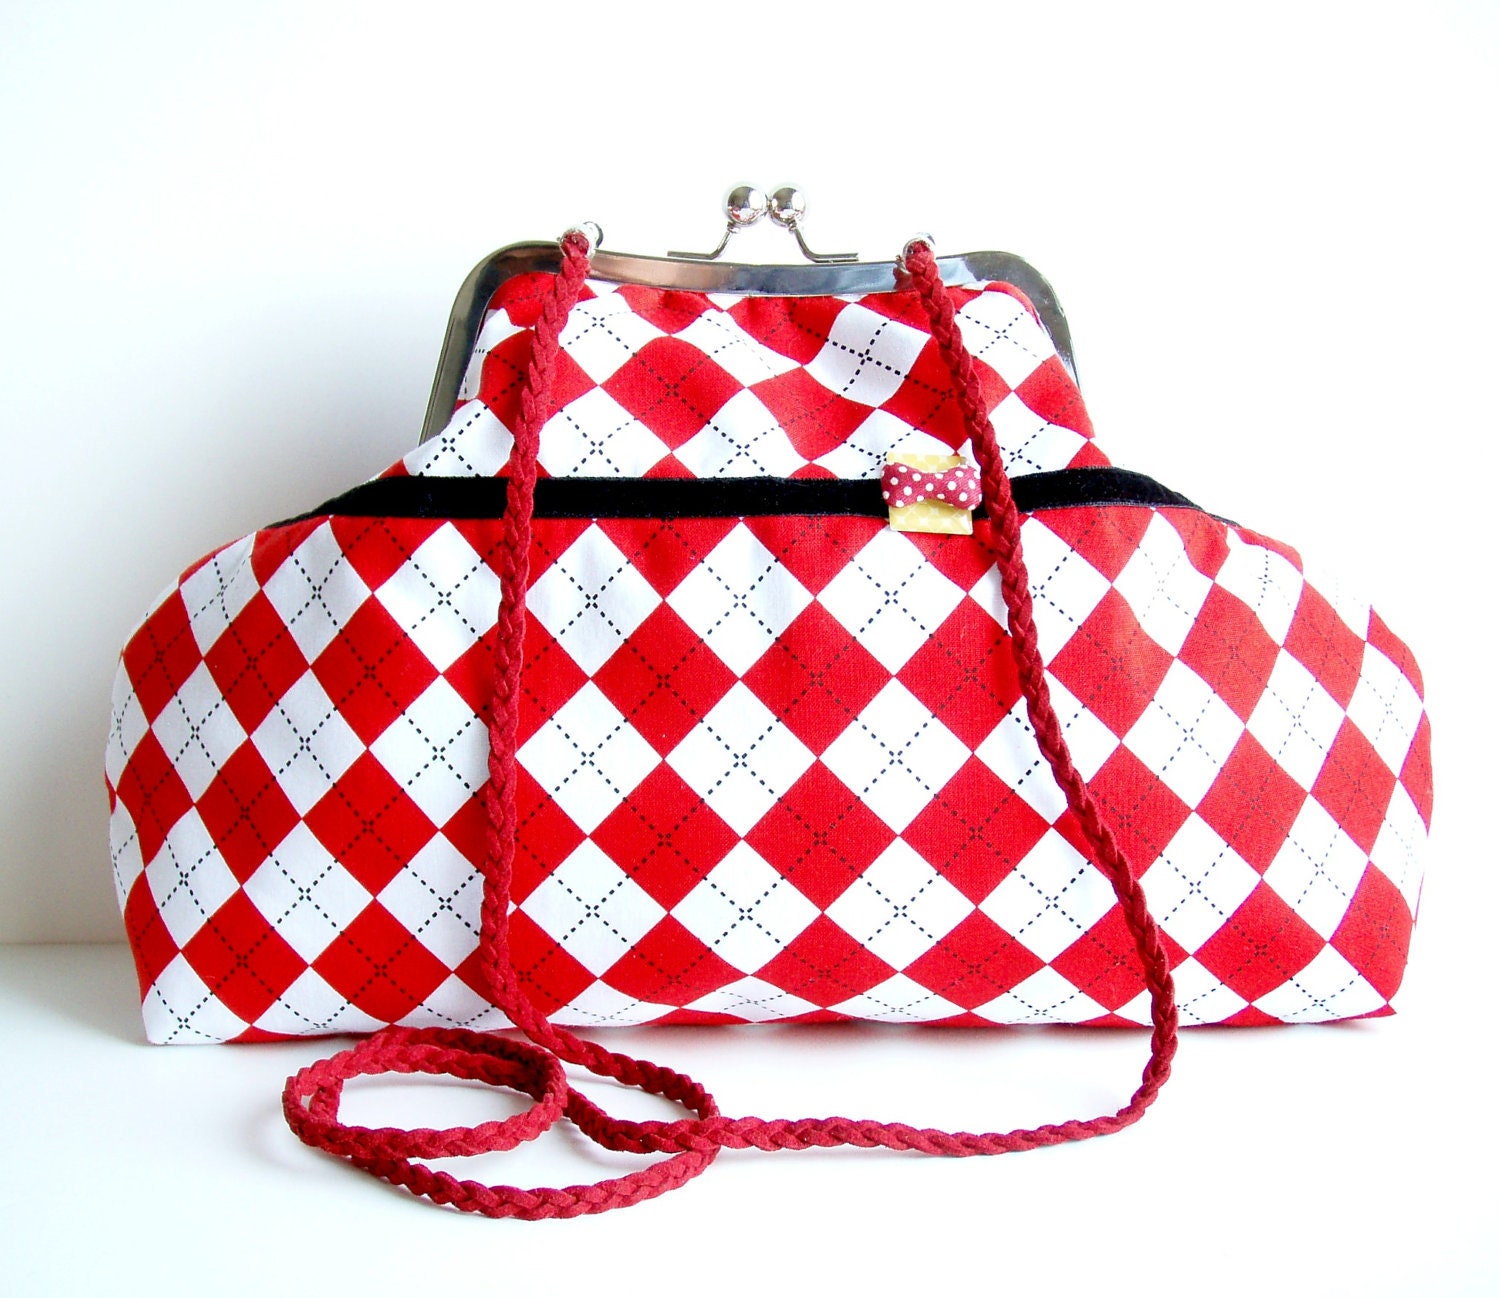 Shoulder Purse Red White Diamonds Printed Fabric Charming Bow - microbio